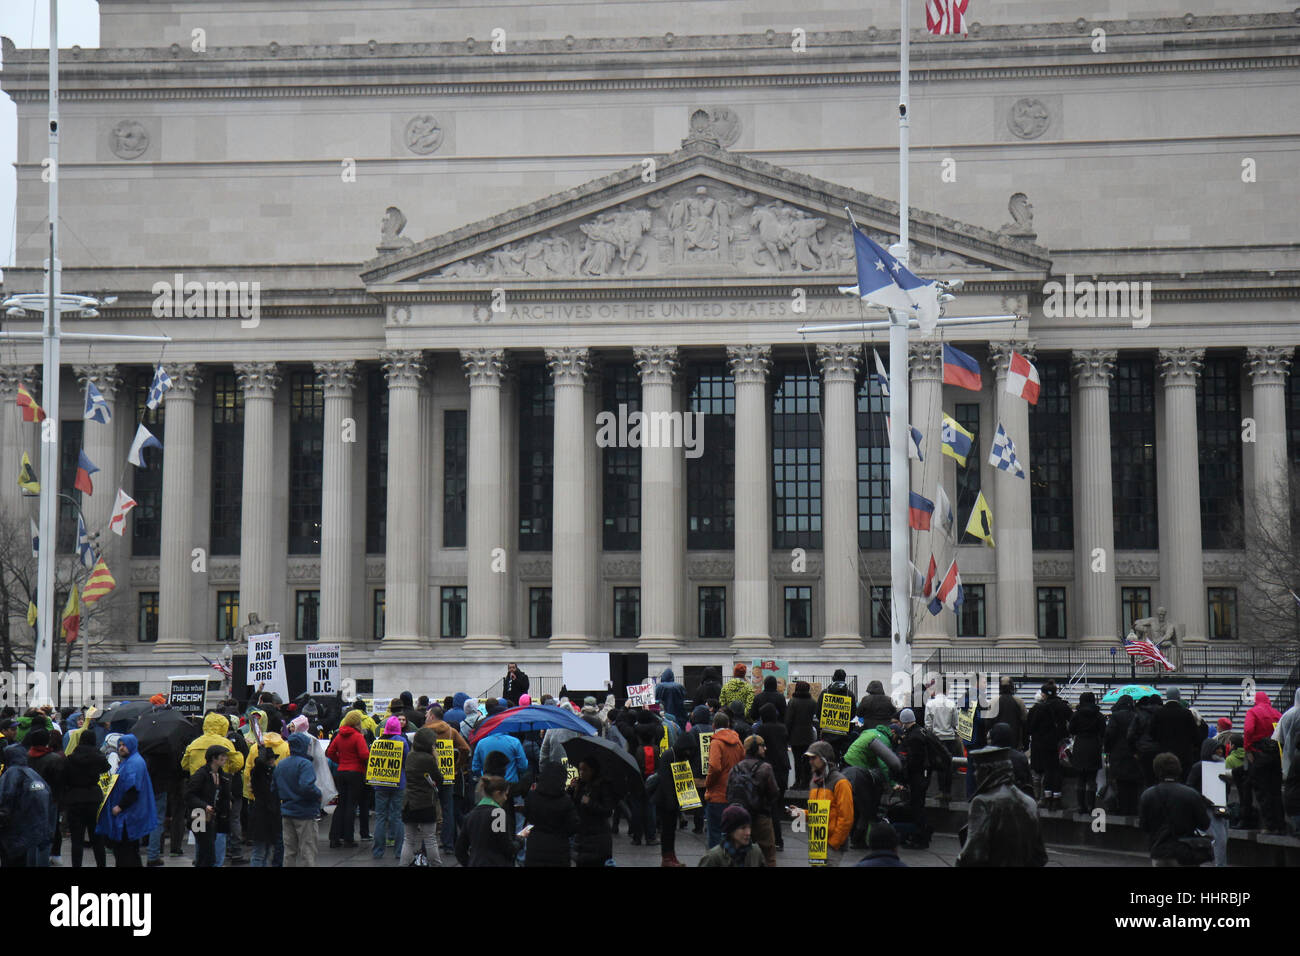 Washington, USA. 20th January, 2017. Protesters at rally held by the ANSWER Coalition on the day of the inauguration of Donald J Trump as President of the United States. Credit: Susan Pease/Alamy Live News Stock Photo